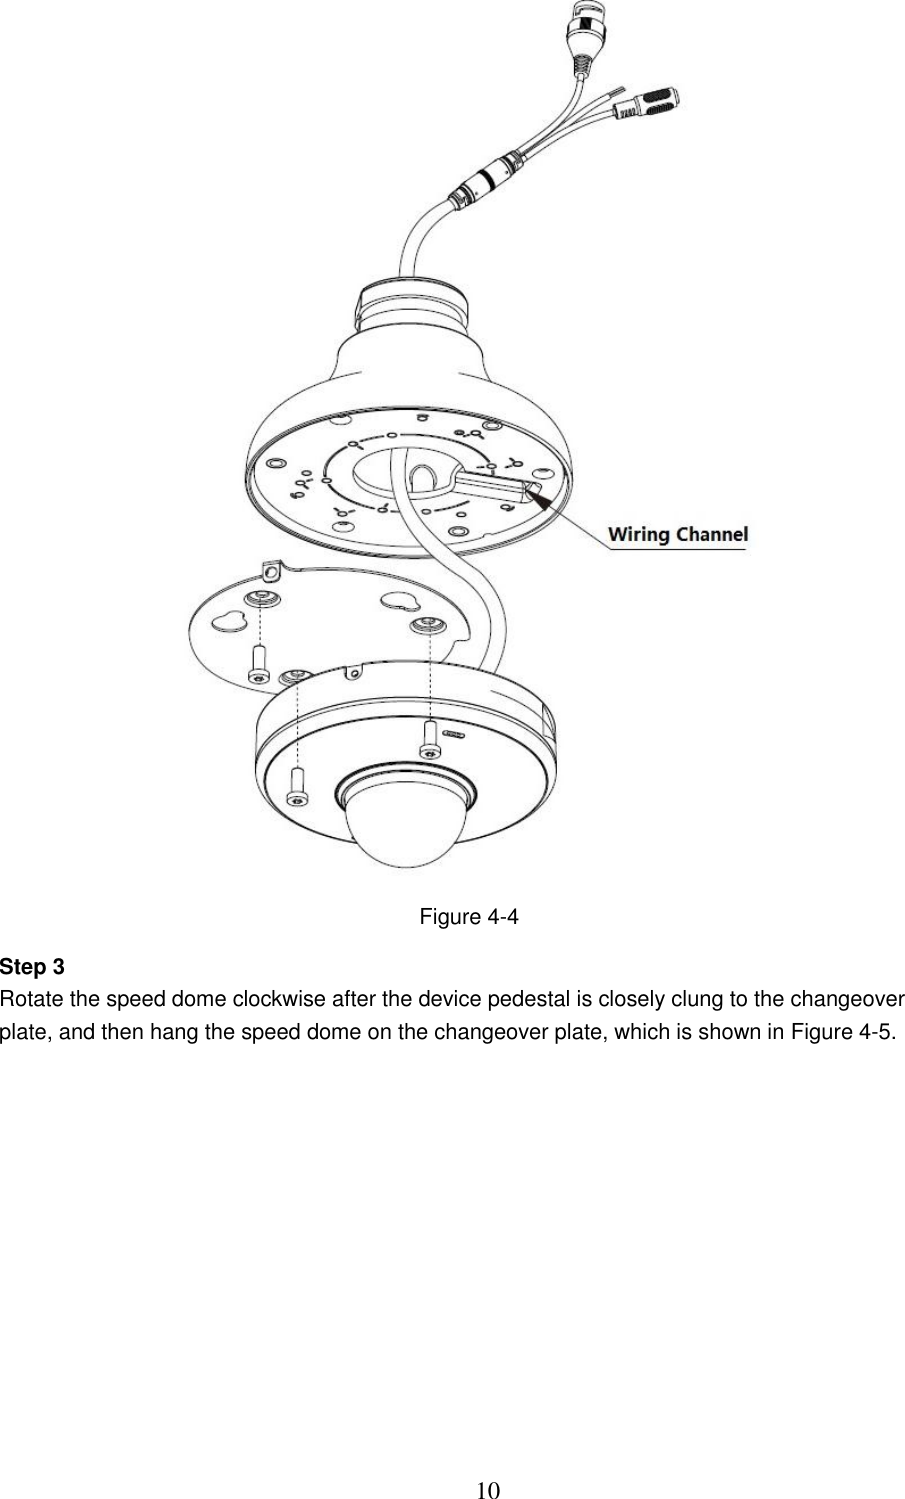  10  Figure 4-4 Step 3 Rotate the speed dome clockwise after the device pedestal is closely clung to the changeover plate, and then hang the speed dome on the changeover plate, which is shown in Figure 4-5. 